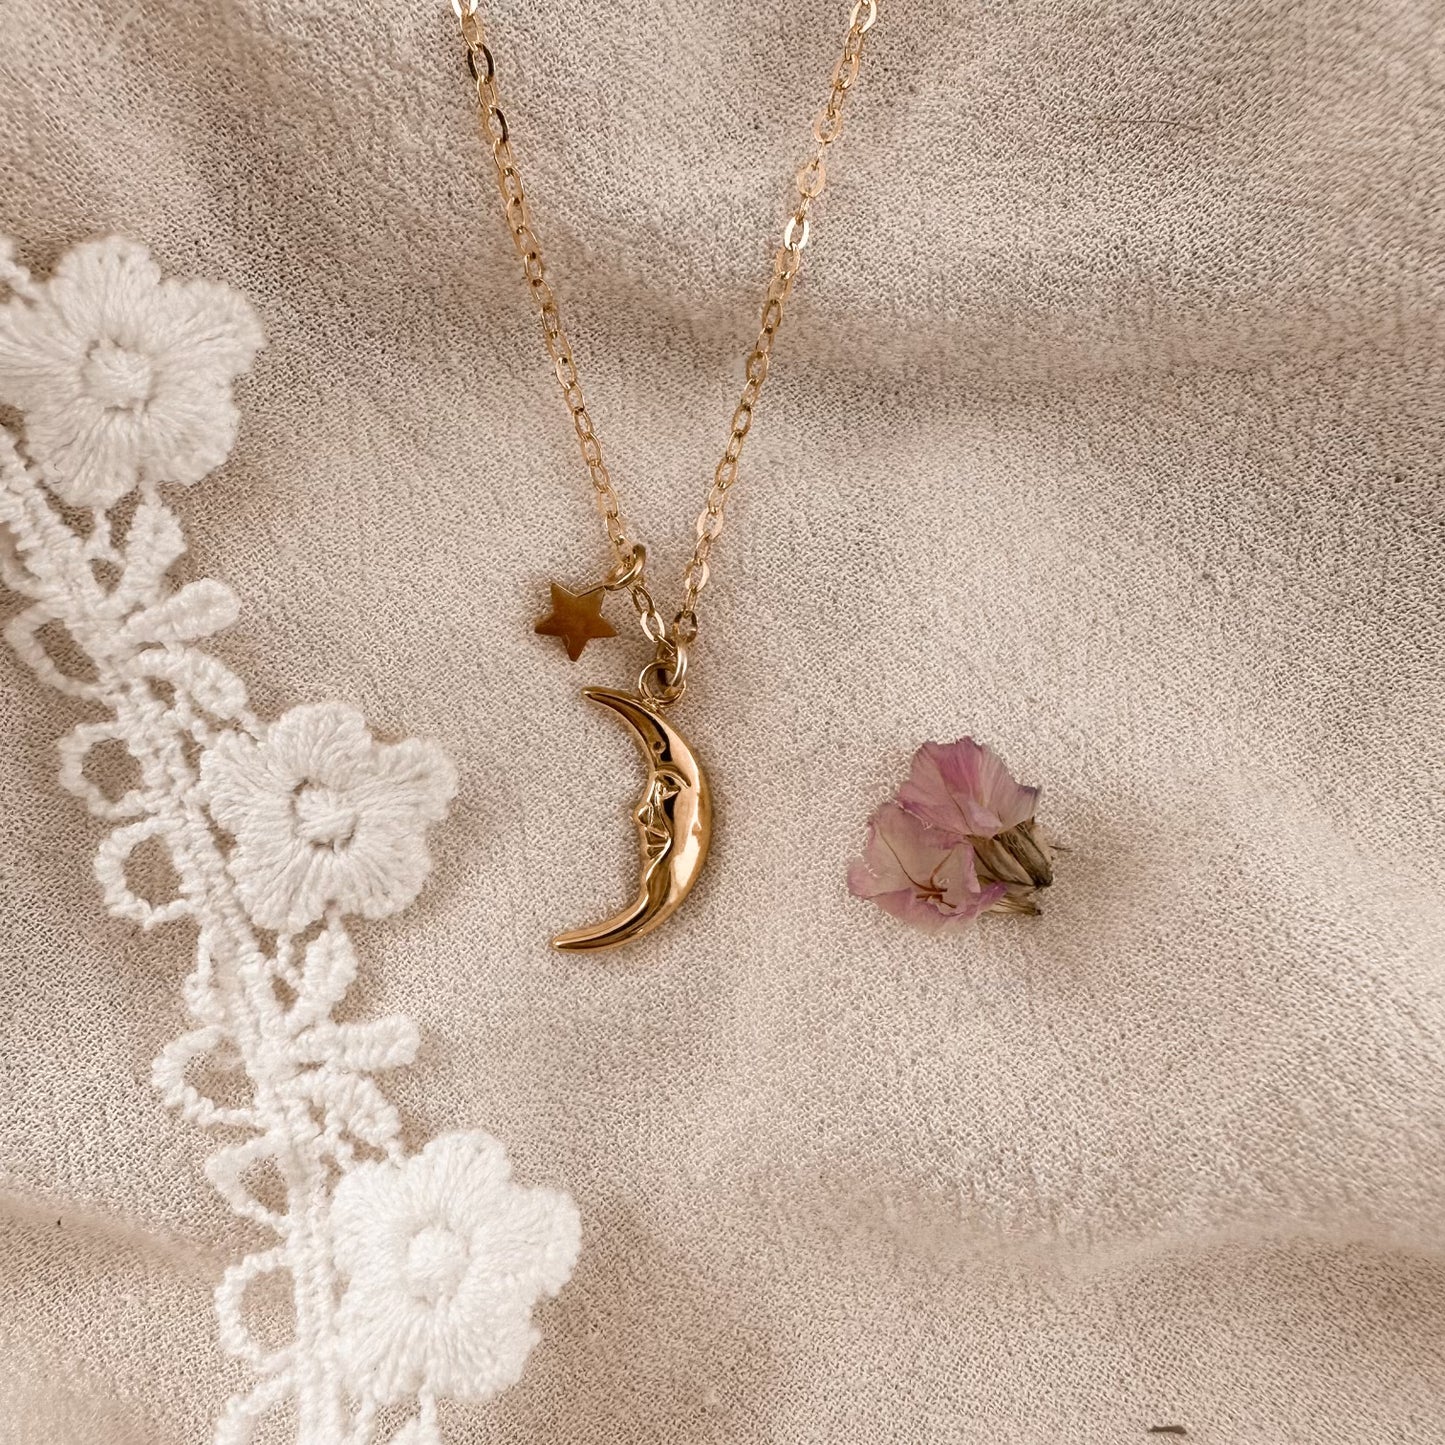 Moon + star necklace - gold